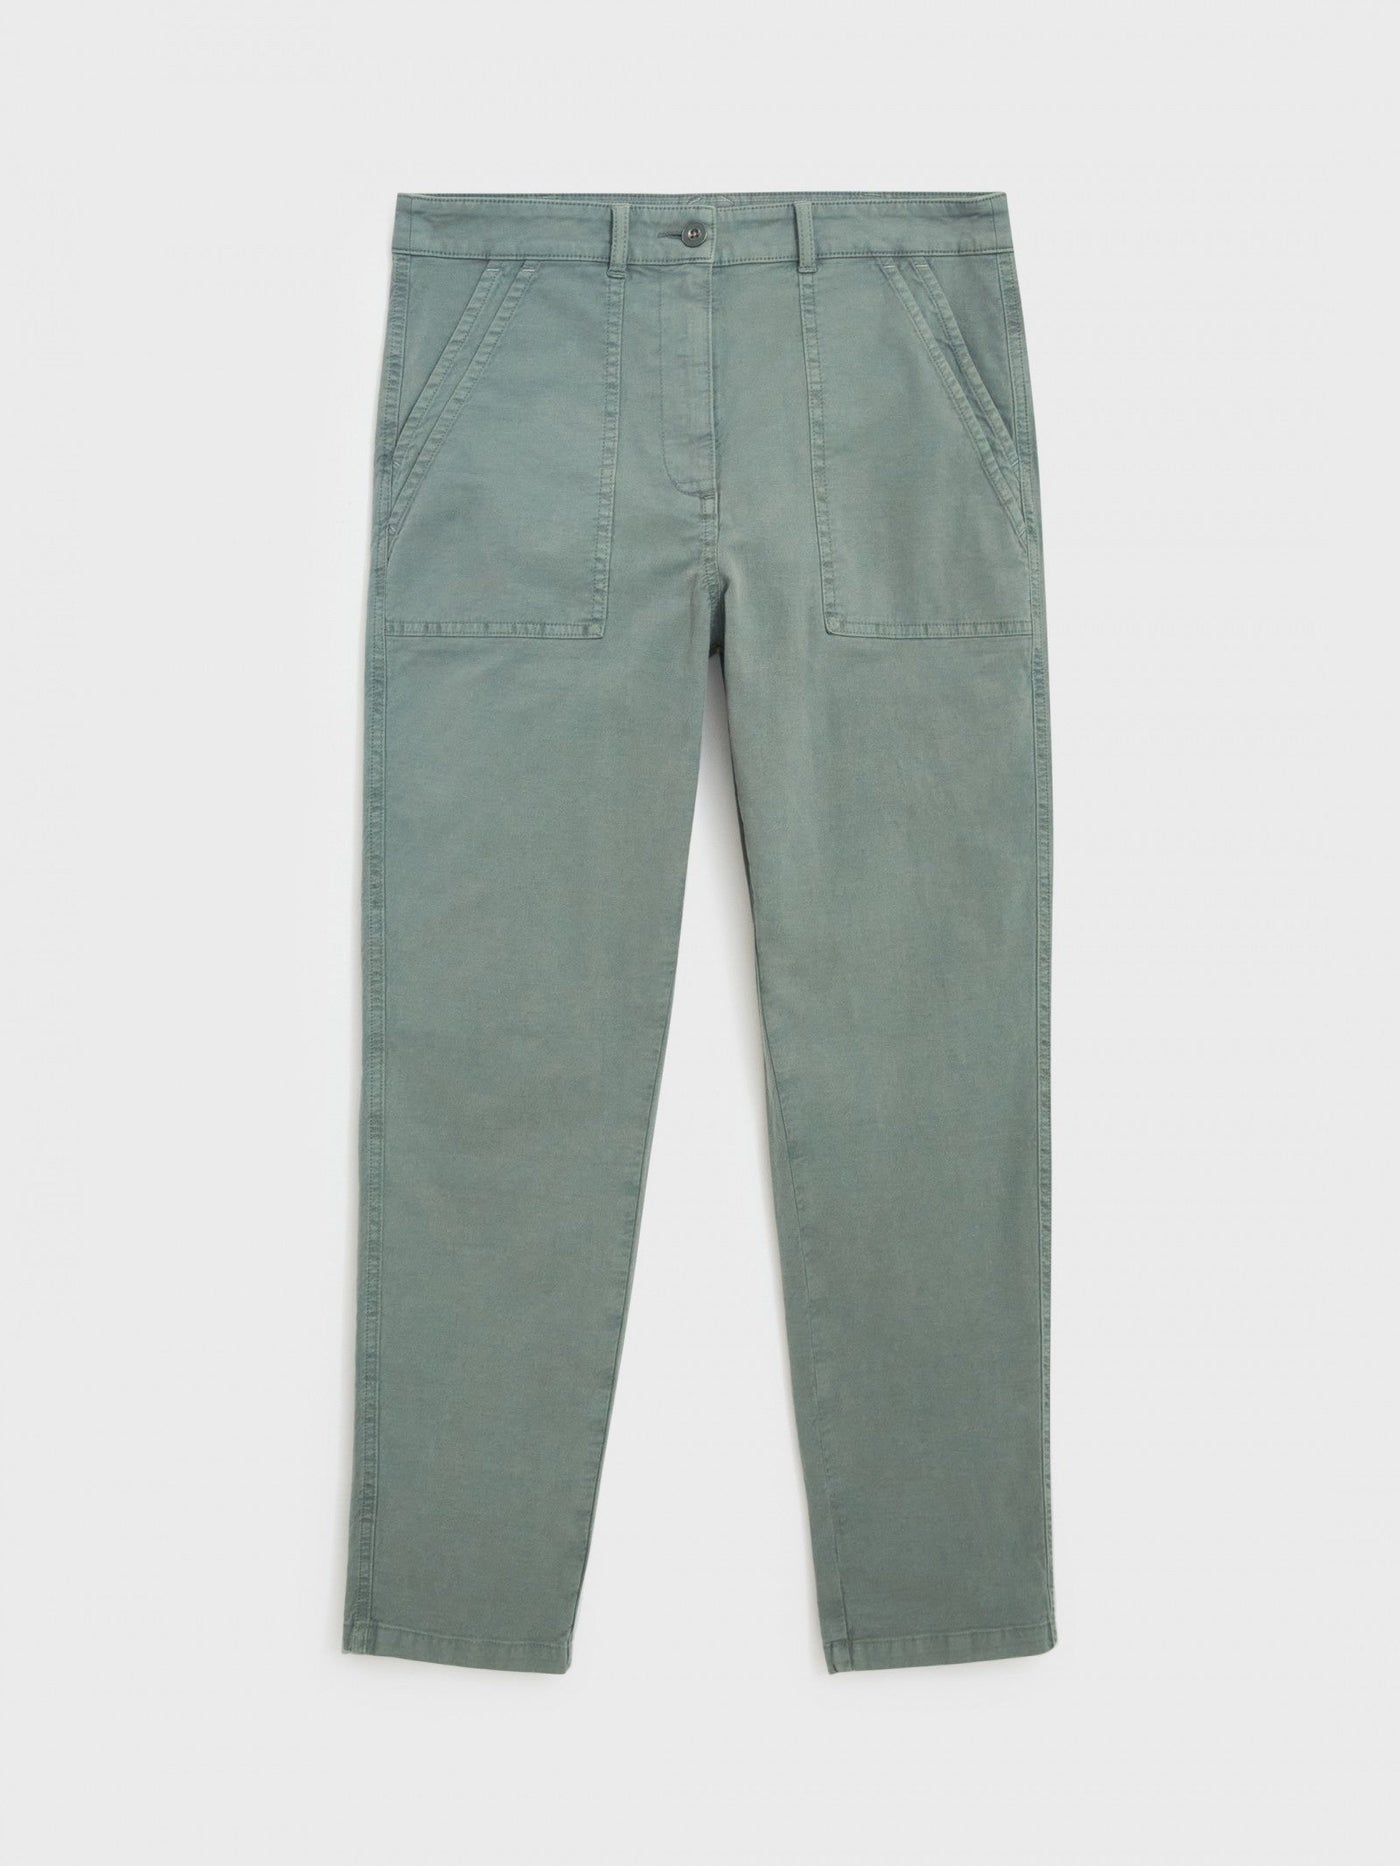 White Stuff Twister Organic Chino Trousers in Mid Green-Womens-Ohh! By Gum - Shop Sustainable